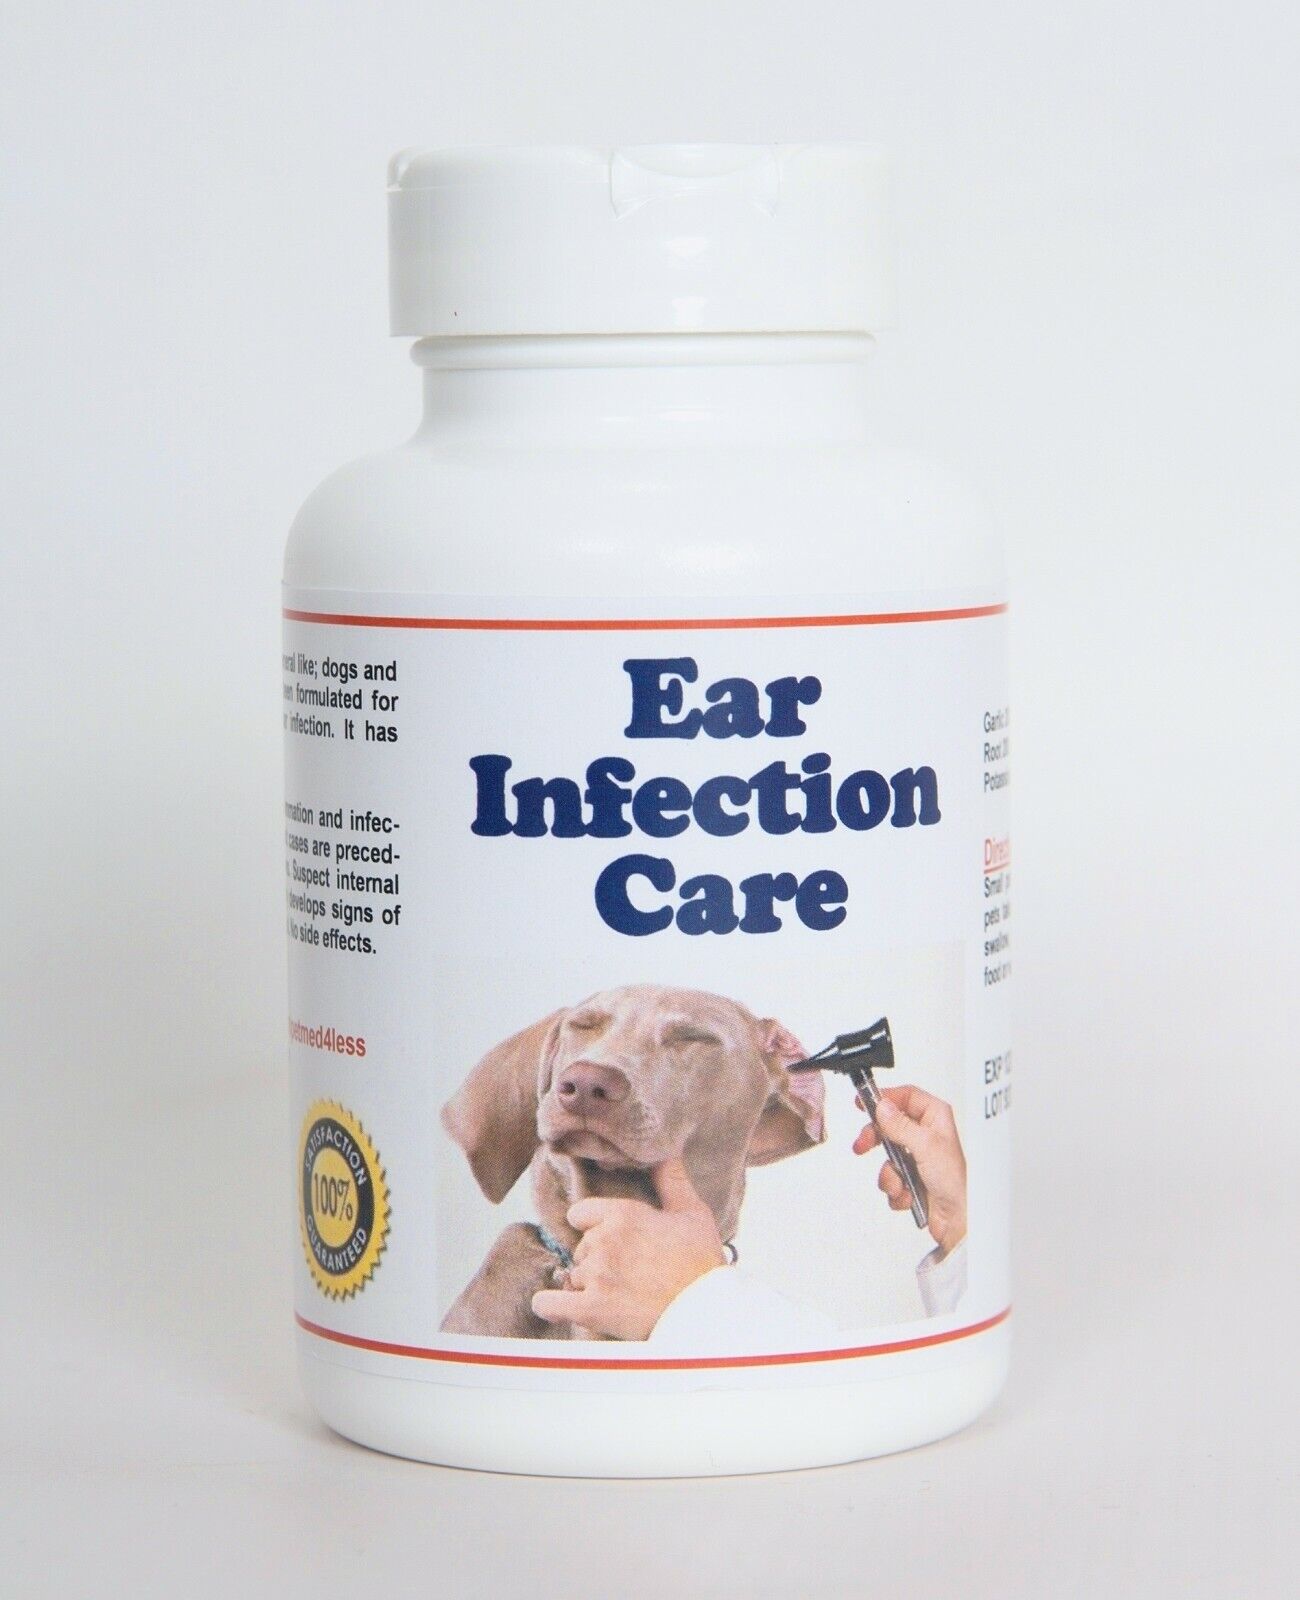 EAR INFECTION CARE FOR PETS - Dogs and Cats - OTITIS - BUY CHEAPLY PAY DEARLY